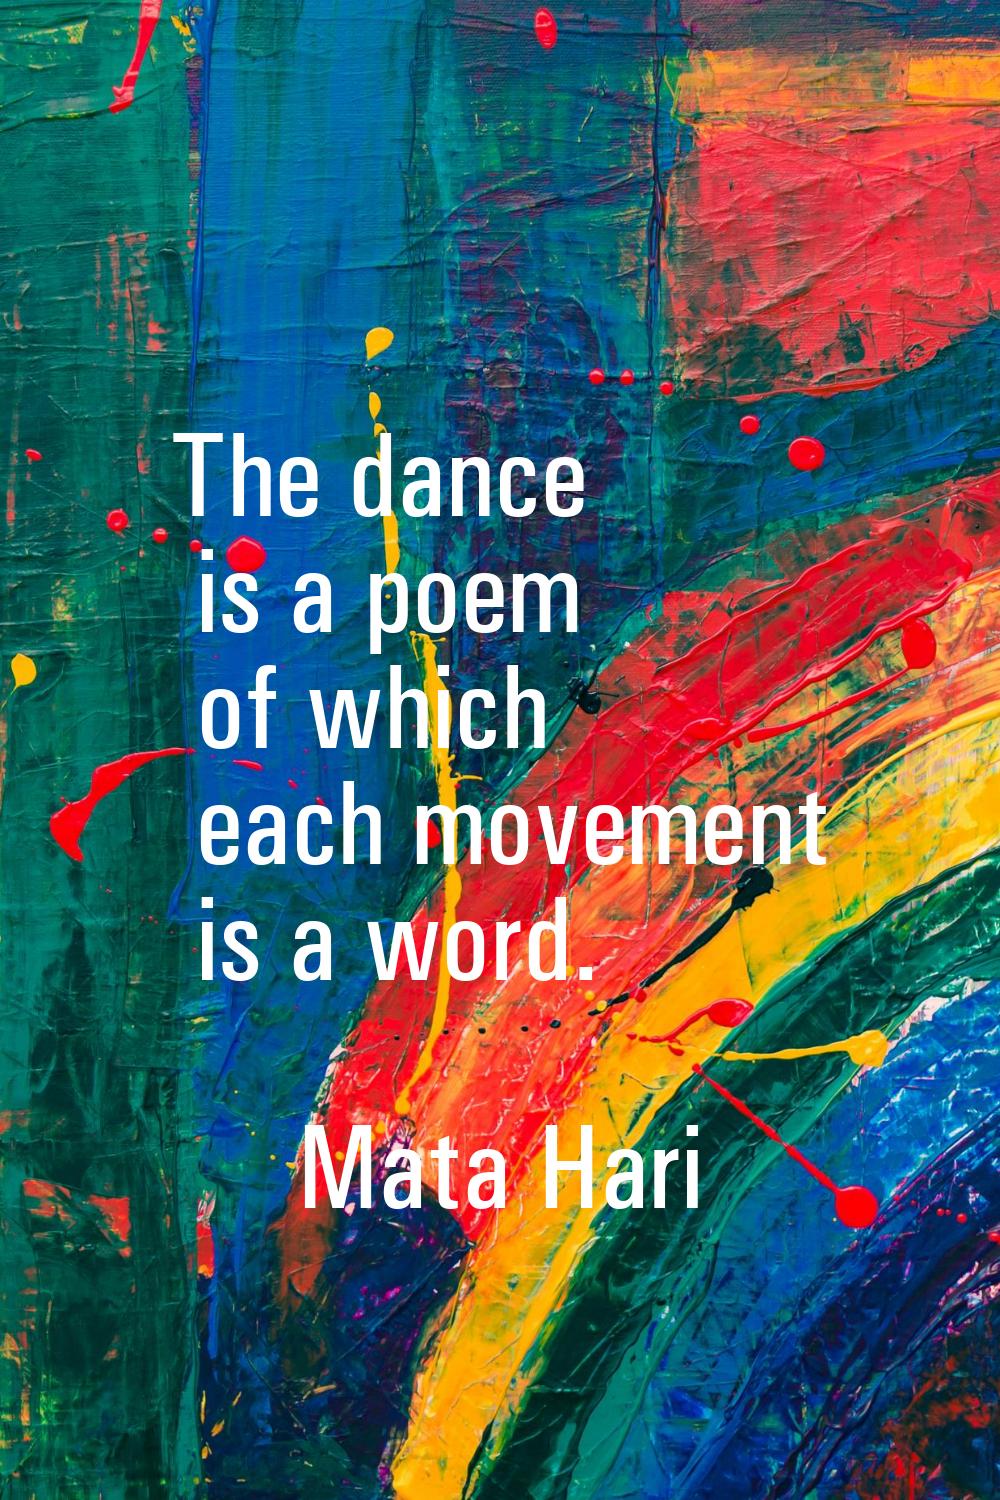 The dance is a poem of which each movement is a word.